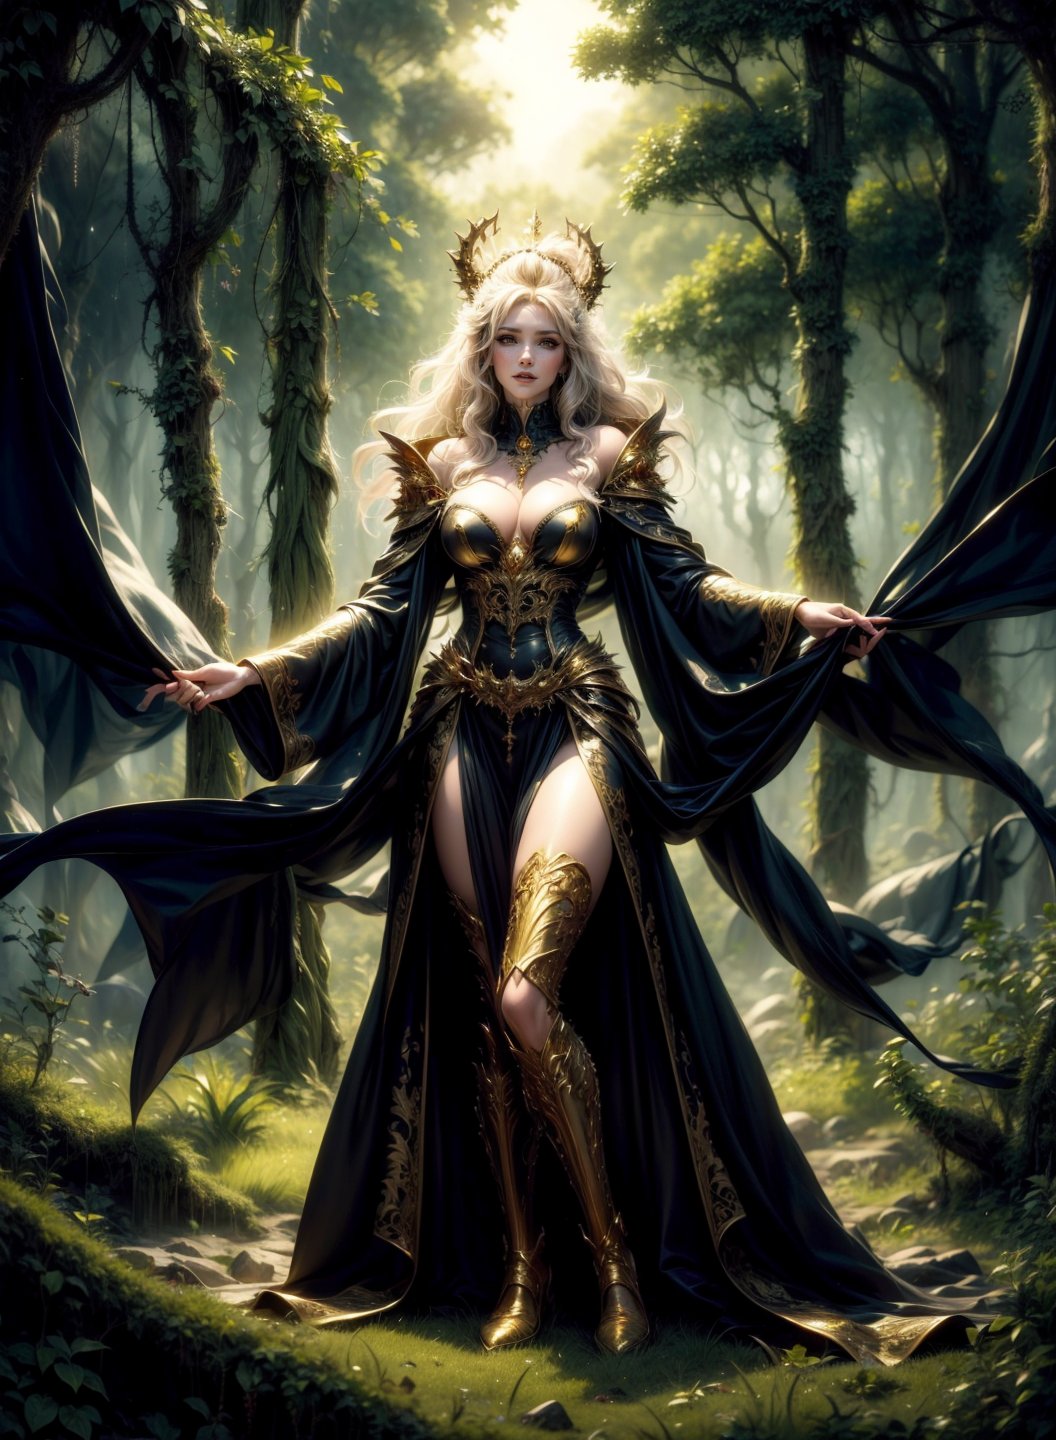 A vampire queen by Luis Royo, richly golden jeweled, standing in majestic pose, greenery forest background